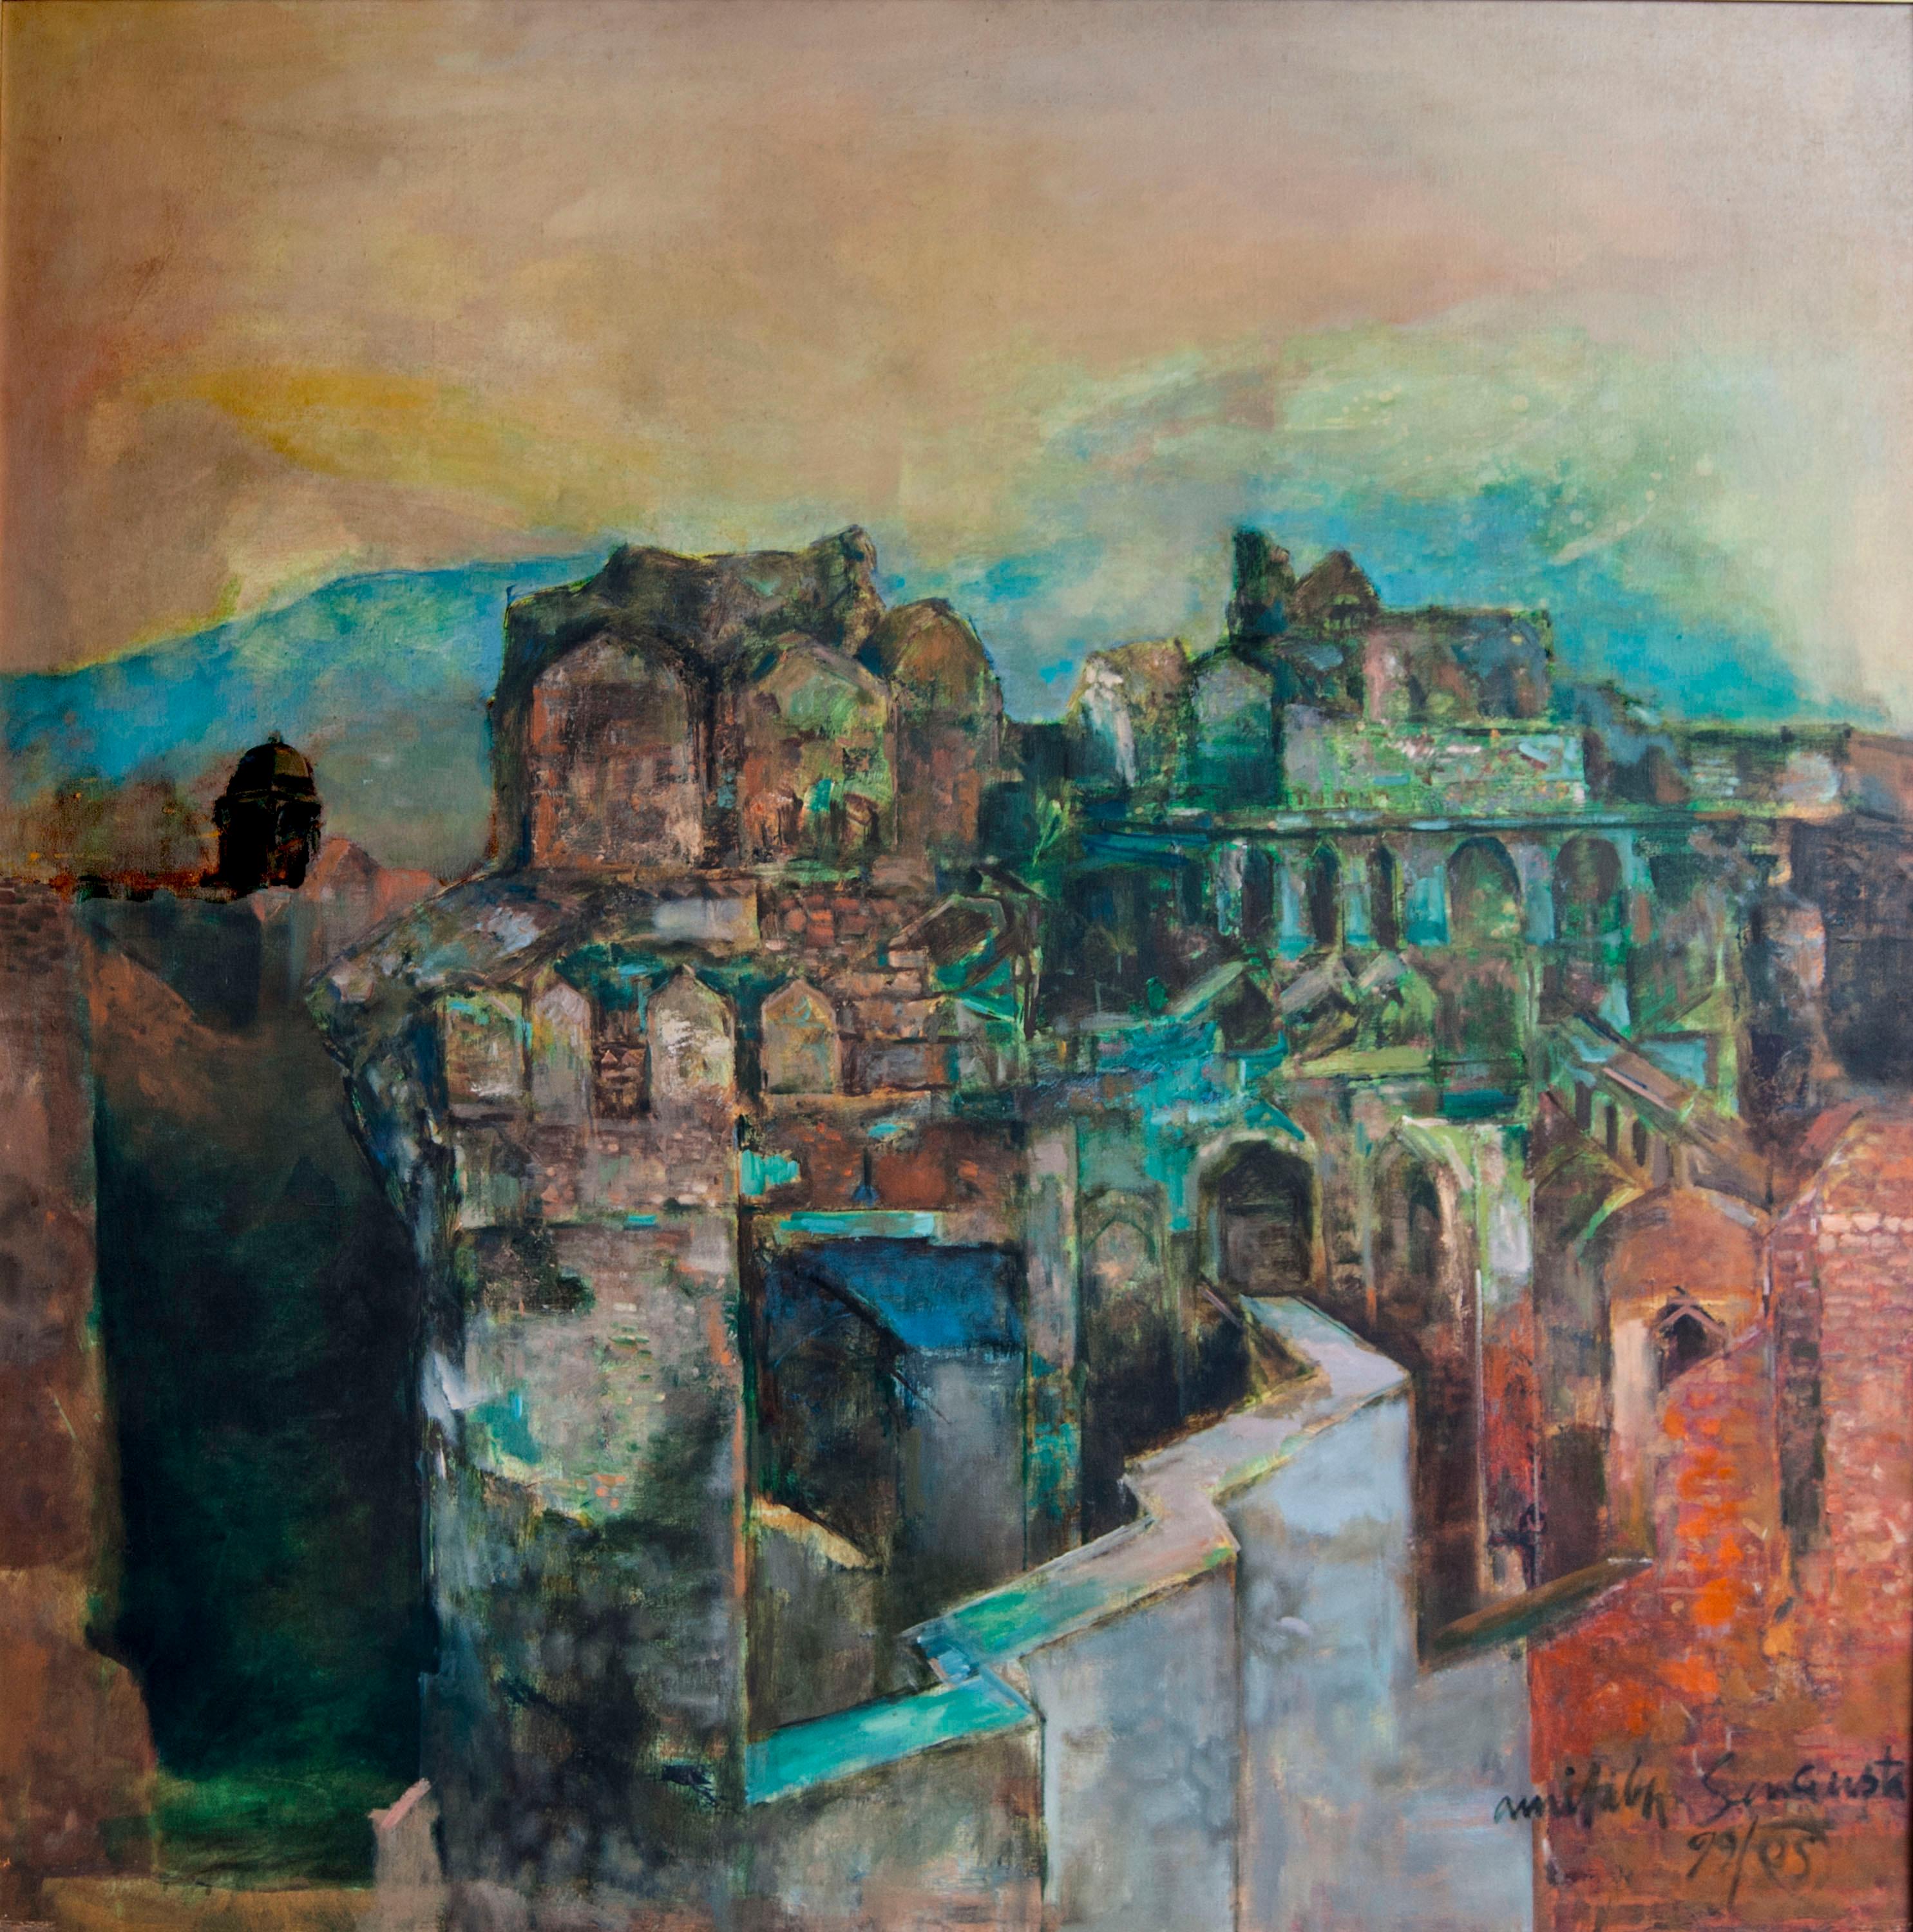 Amitabh Sengupta Abstract Painting - Unknown Fort, Mythscape, Series of Structures, Oil painting by Amitabh "In Stock"